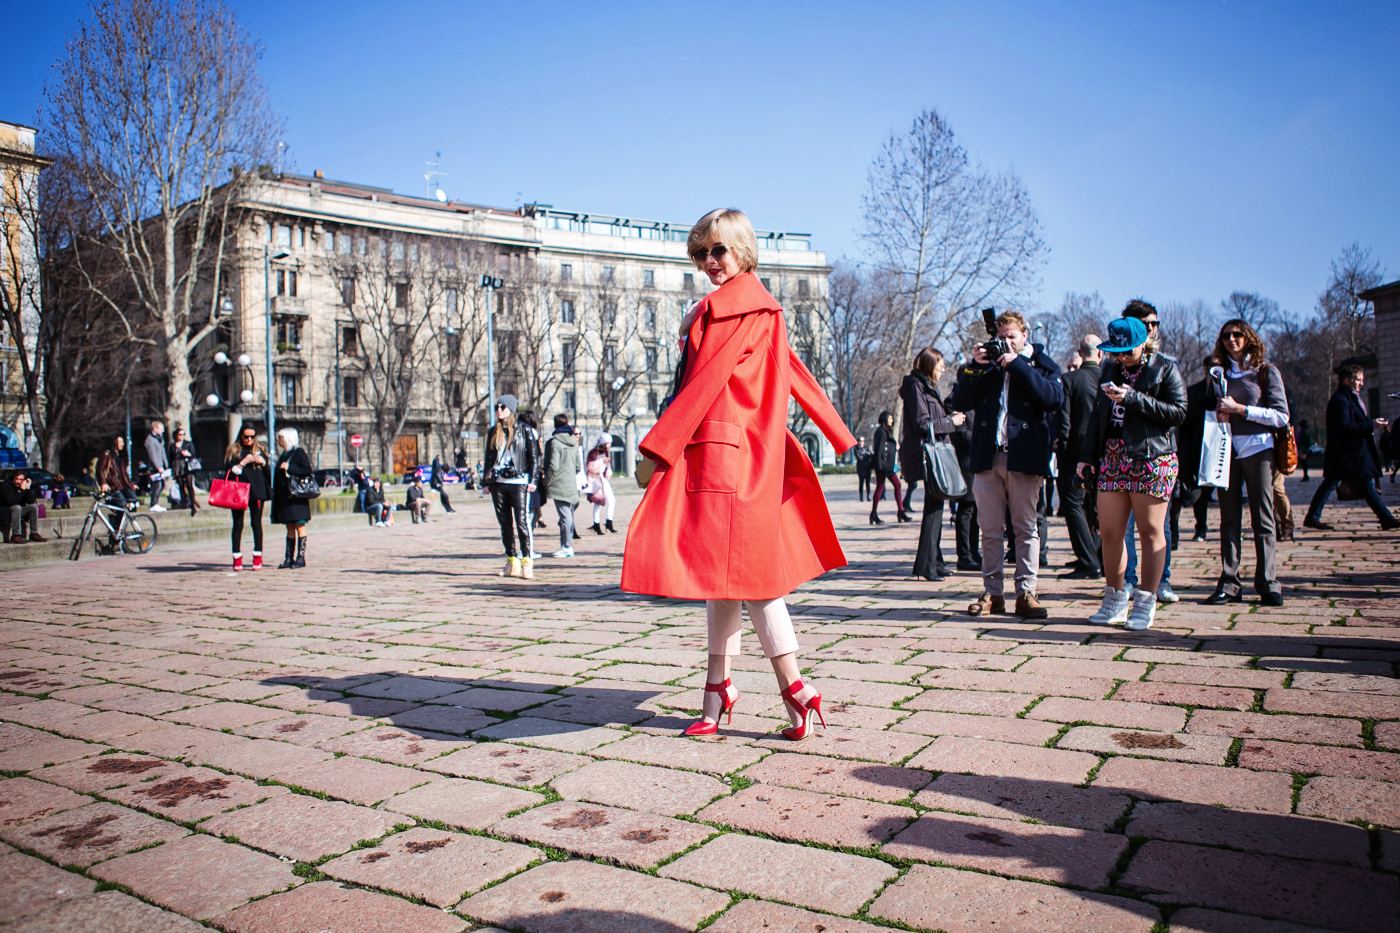 thecablook darya kamalova russian italian fashion blogger blonde short hair pixie cut street style whats inside you by eleonora carisi outfit asos long red coat steven heels shopbop milan fashion week aw14 15 arco della pace just cavalli-3 copy